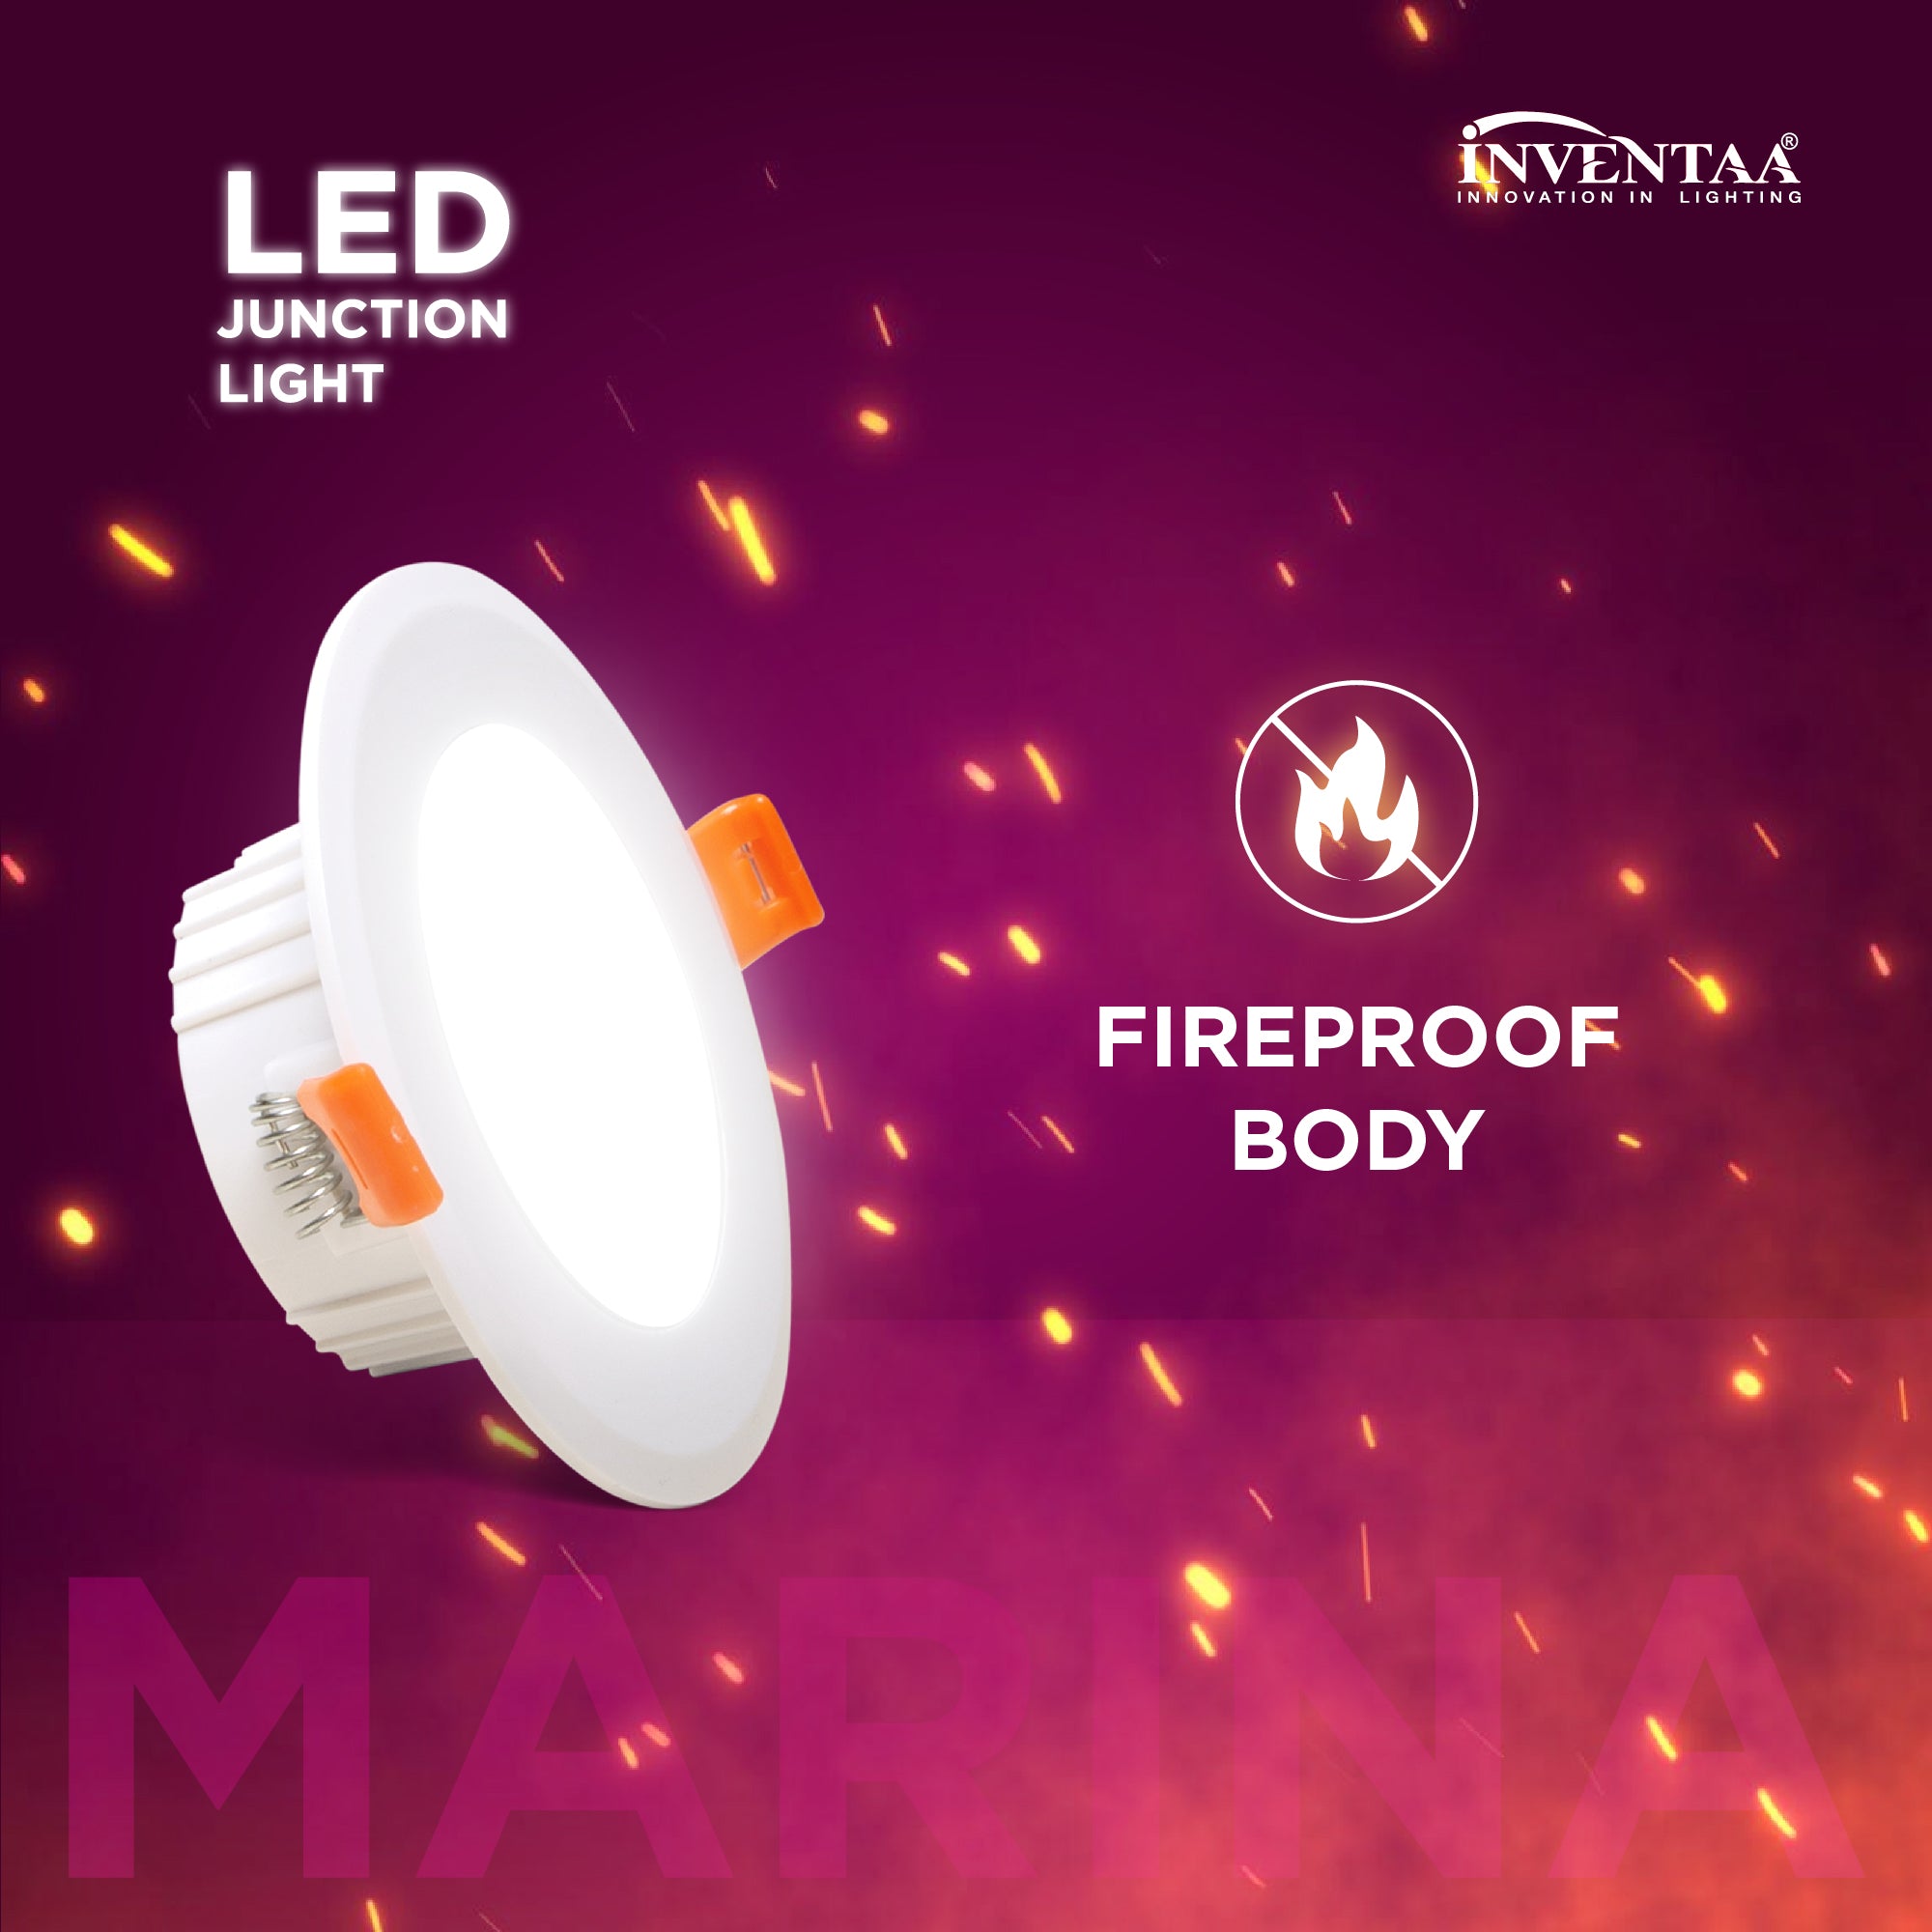 Marina 8W LED Junction Light Featuring Its Fireproof Resistance #Suitable For_2.5 inch Deep Junction Box